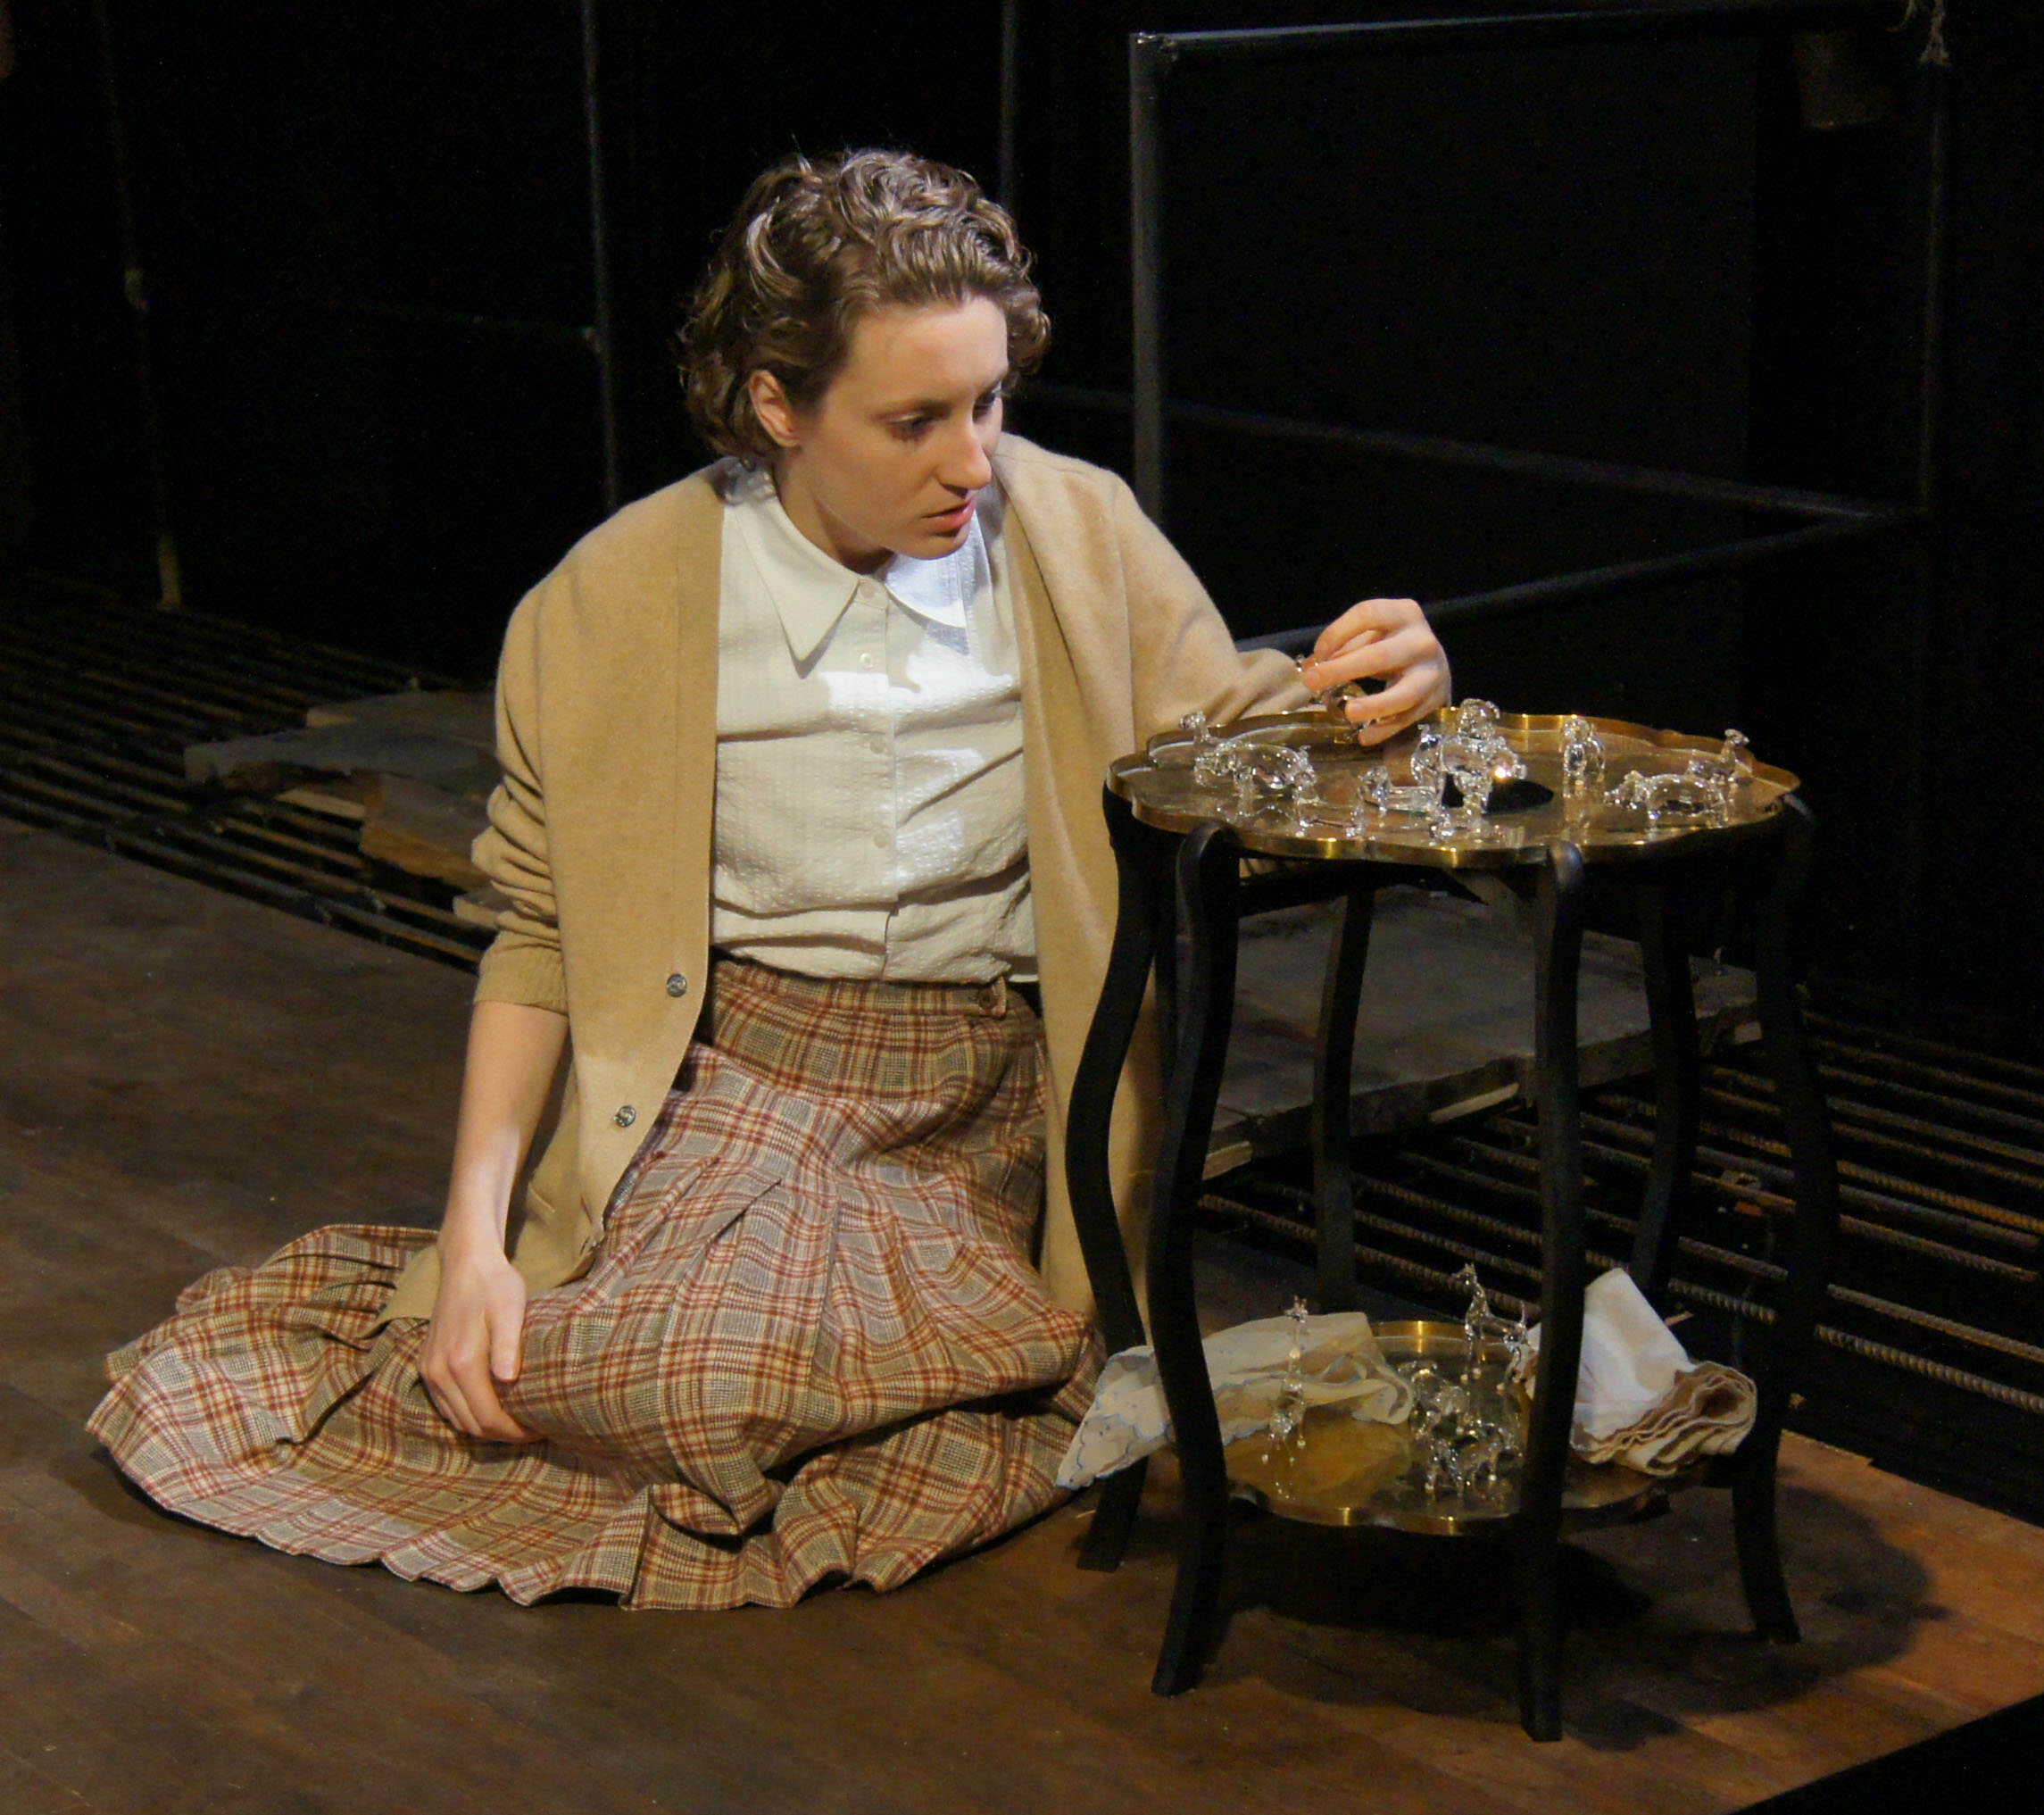 The Glass Menagerie - Theatre reviews2290 x 2033